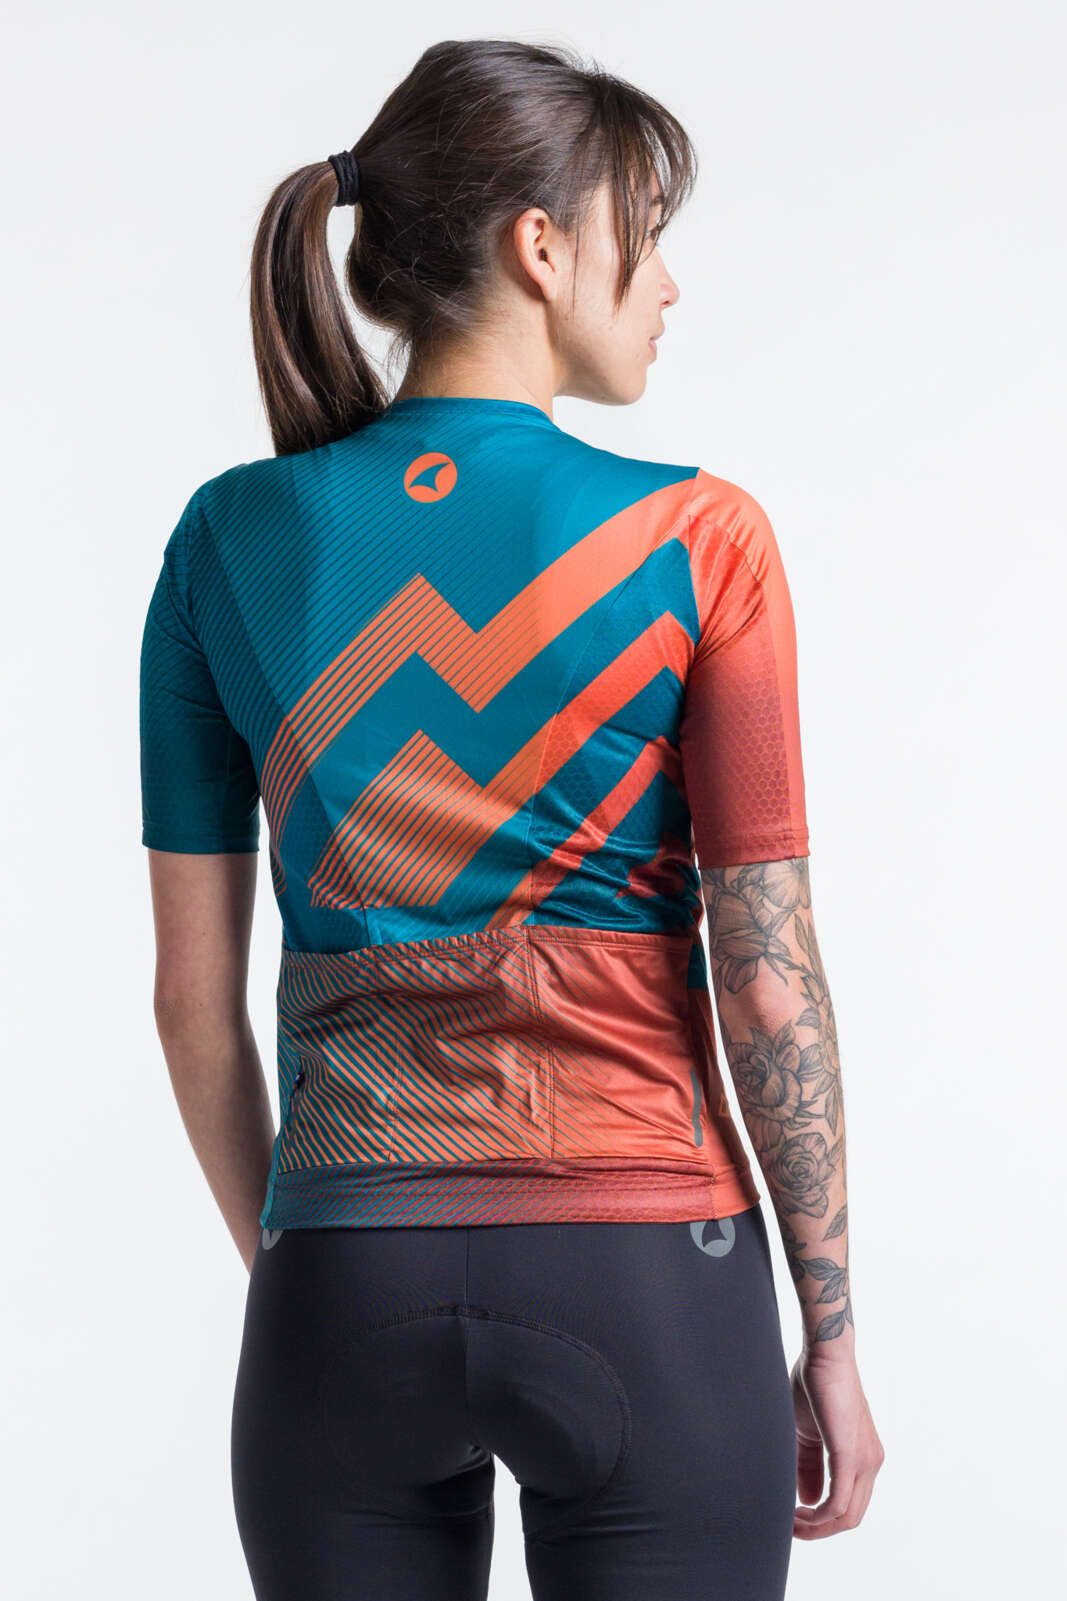 Women's Best Teal & Orange Cycling Jersey - Summit Front View